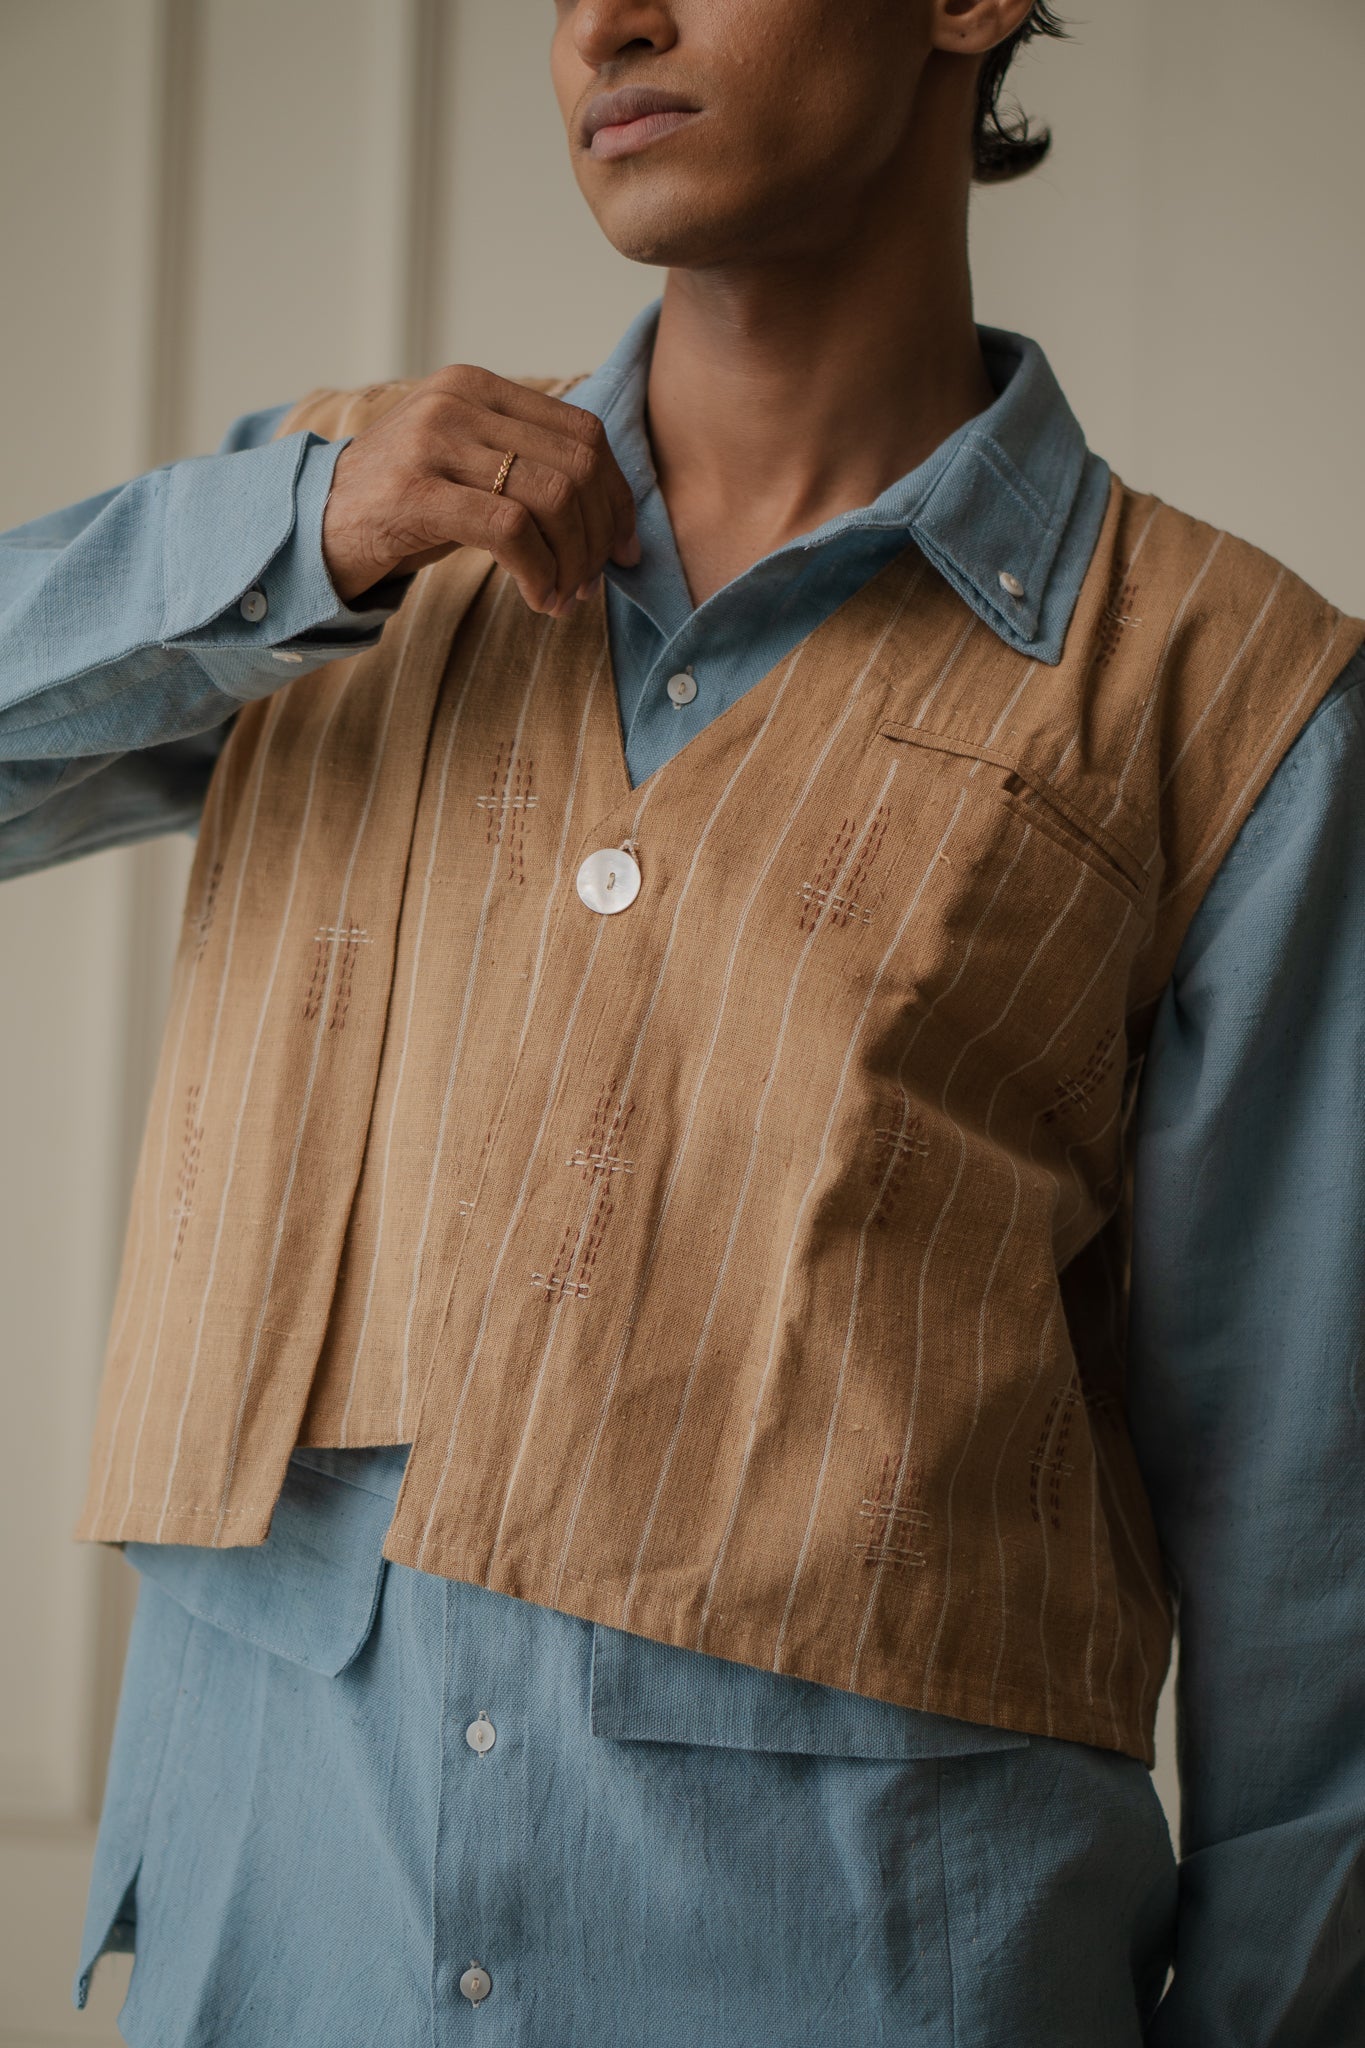 Asymmetric Unisex Waistcoat at Kamakhyaa by Lafaani. This item is 100% pure cotton, Brown, Casual Wear, Materiality, Menswear, Natural with azo free dyes, Organic, Regular Fit, Solids, Sonder, Undyed and Unbleached, Unisex, Waistcoat